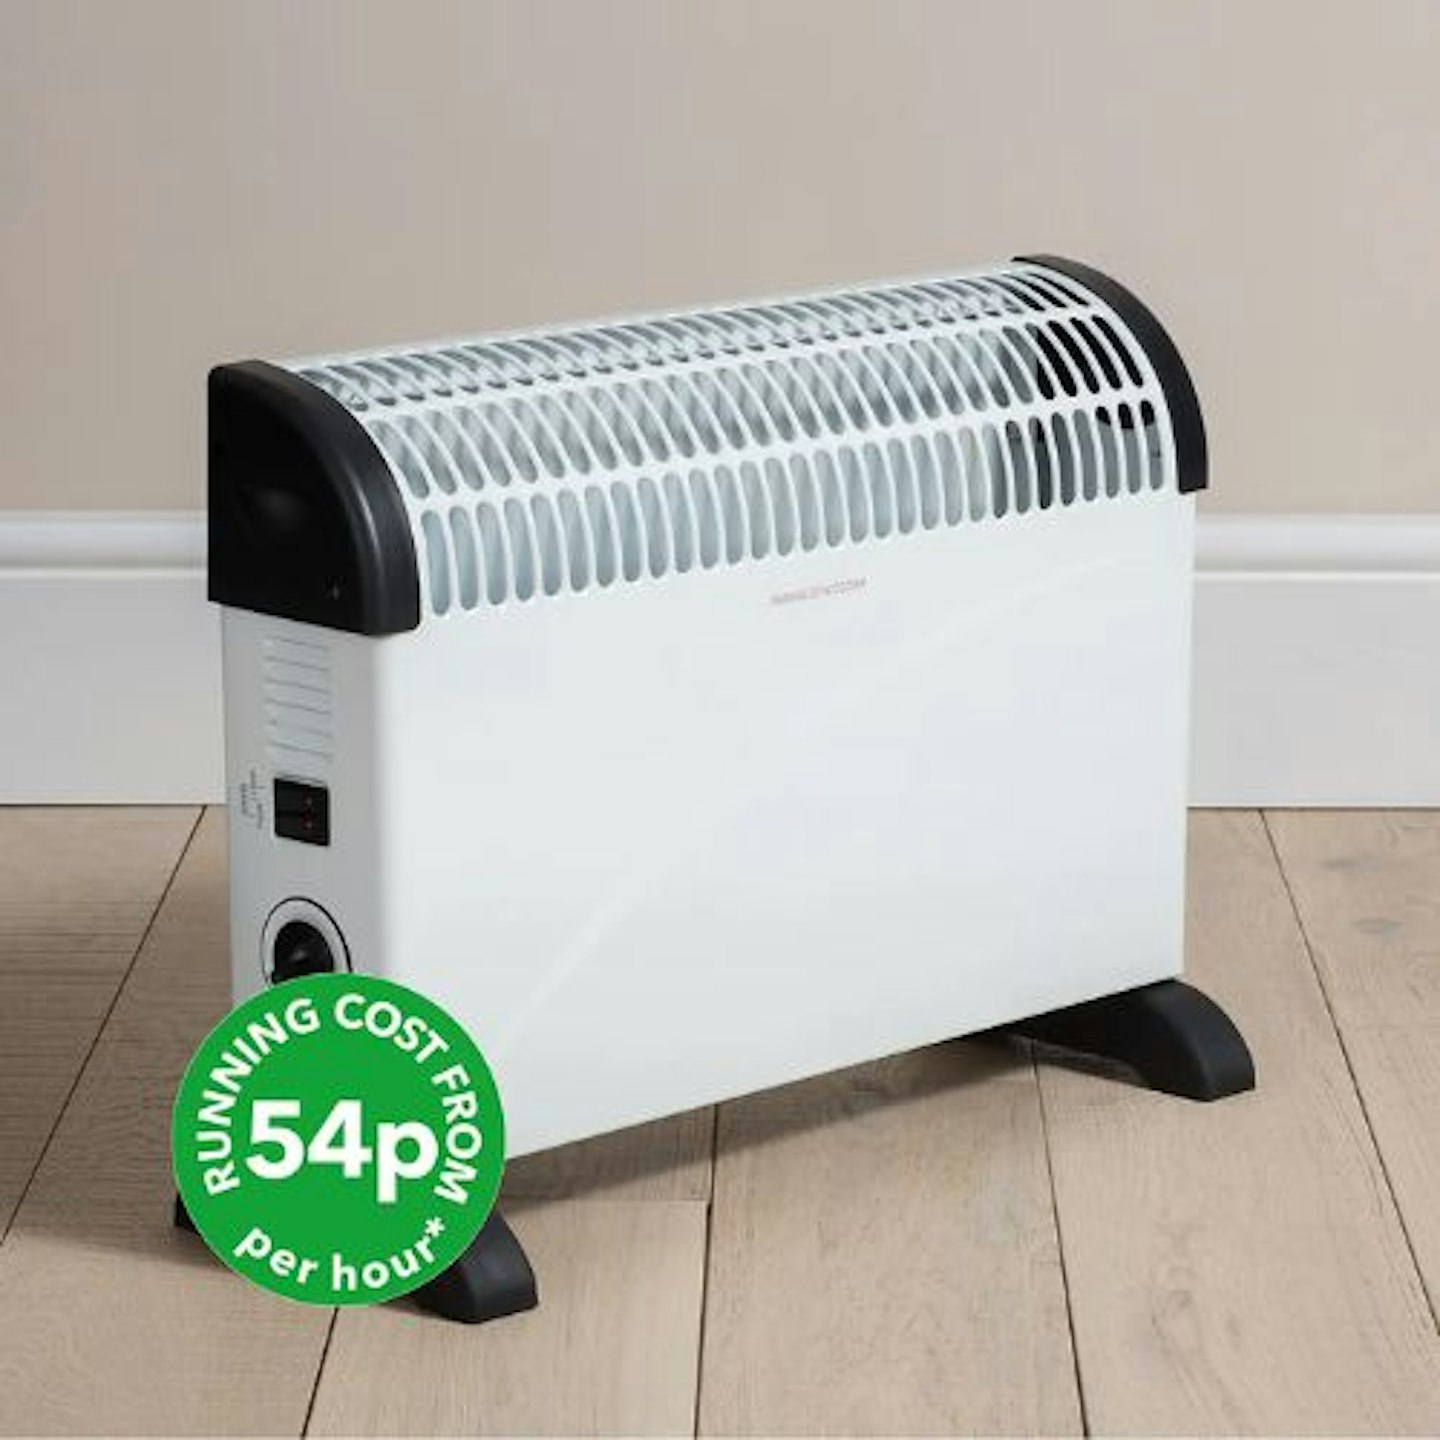 White Convector Heater